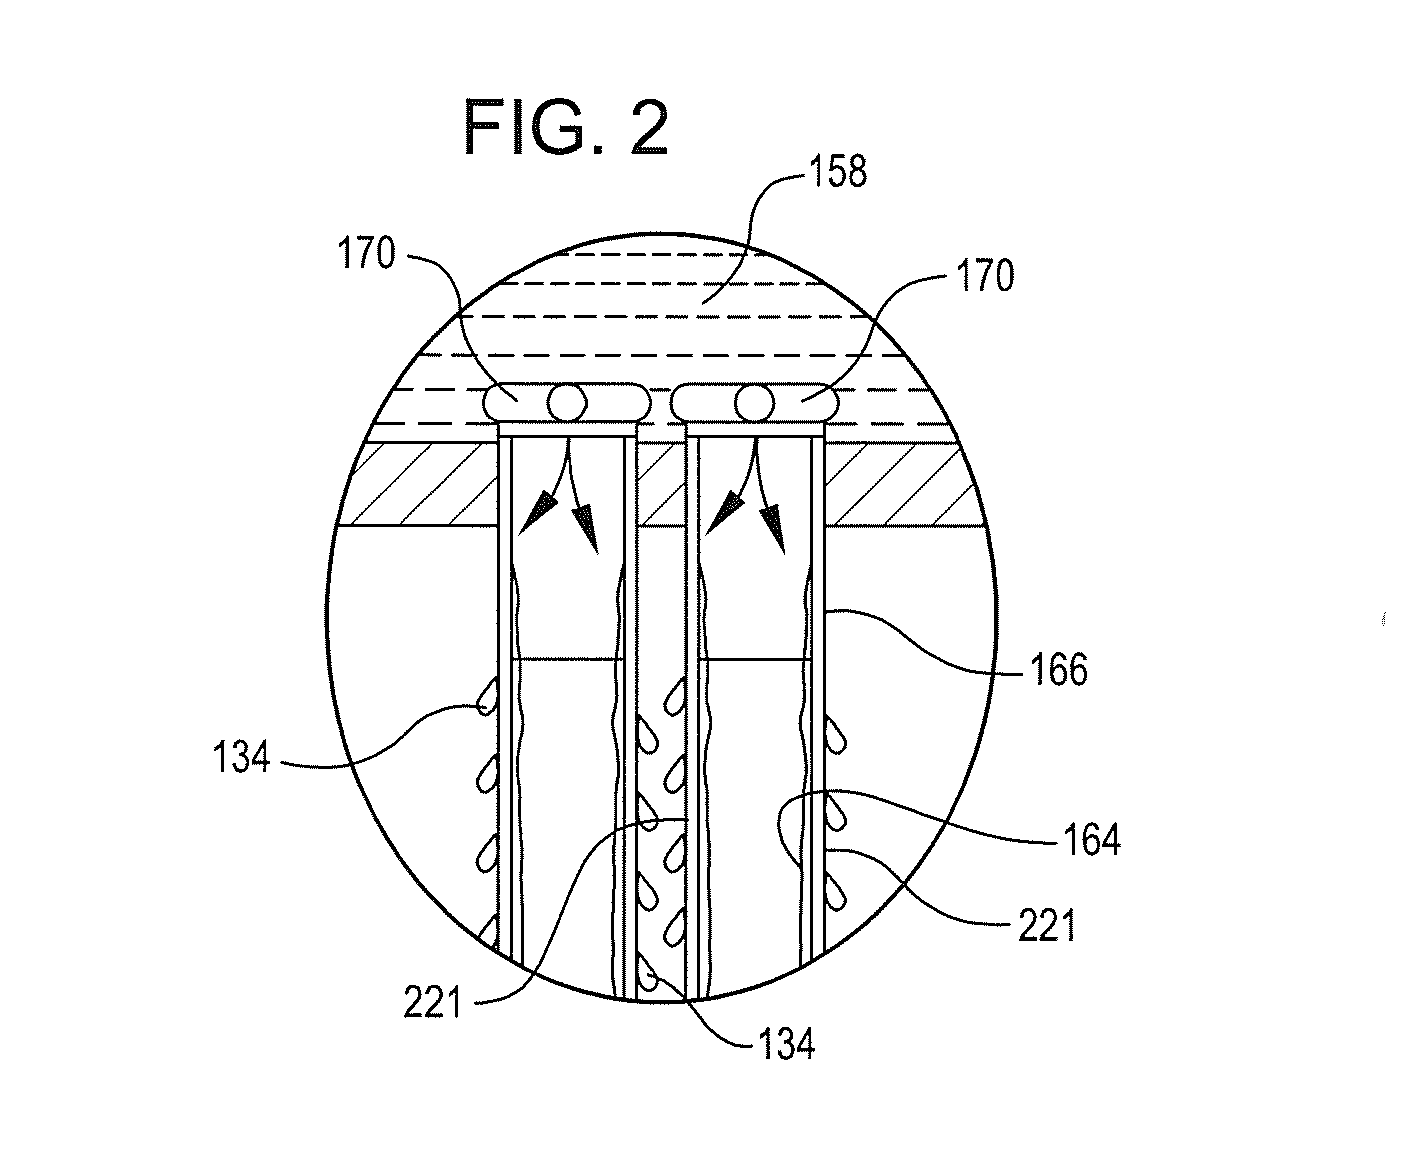 Method and apparatus for reduction of contaminants in evaporator distillate